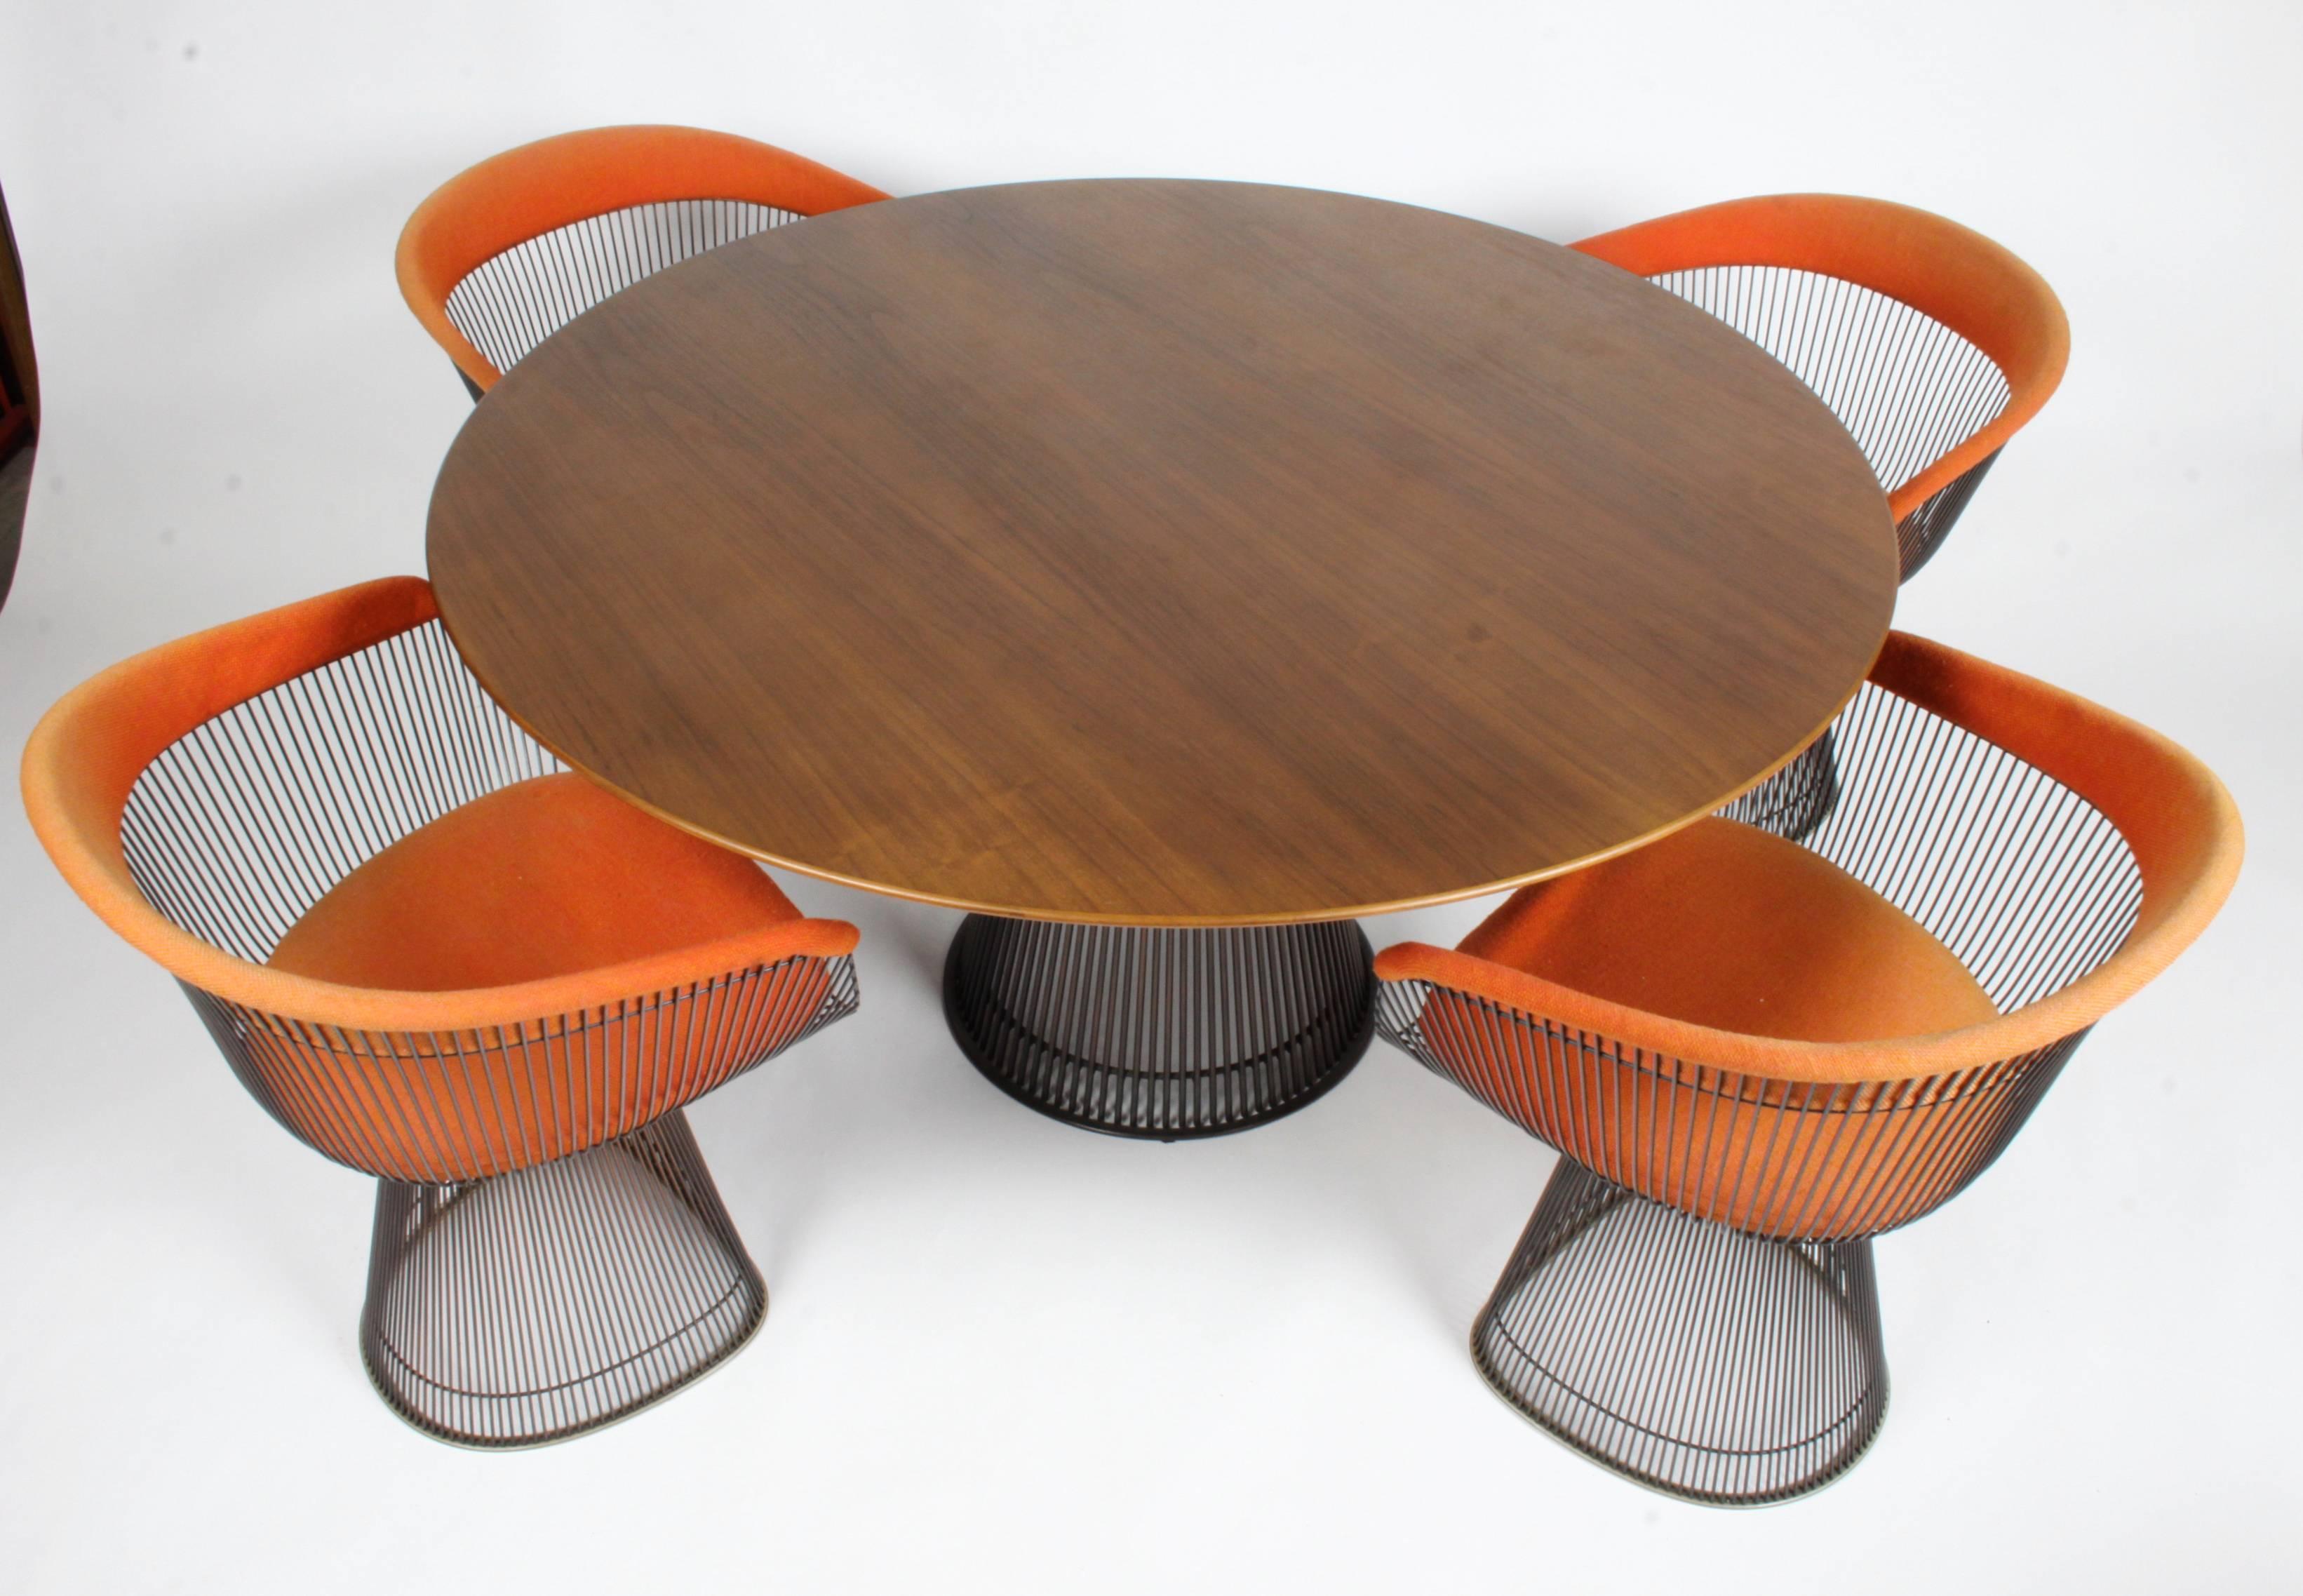 Vintage Warren Platner for Knoll bronze dining set for Knoll with early labels. The top has been refinished, the chairs upholstery and foam are original and may need to be updated, as it shows light sun fading and stiffness to back and arm foam. Two